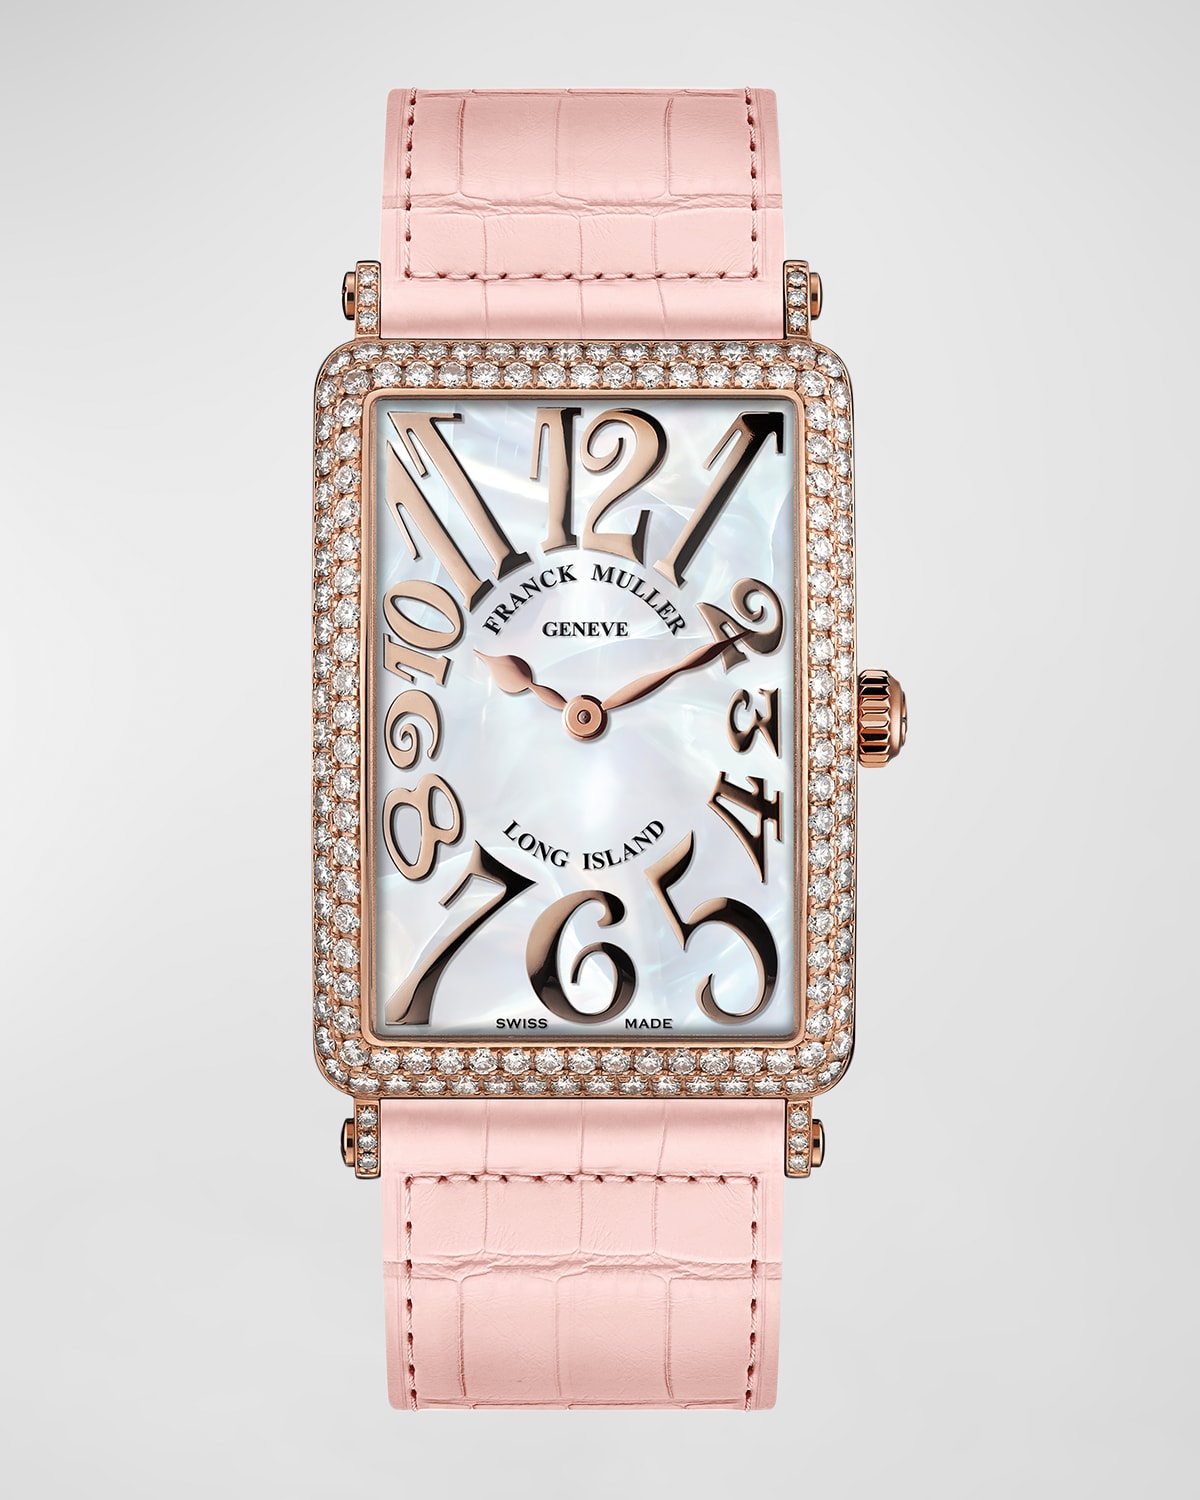 Franck Muller 18k Rose Gold Diamond 2-row Mother-of-pearl Watch